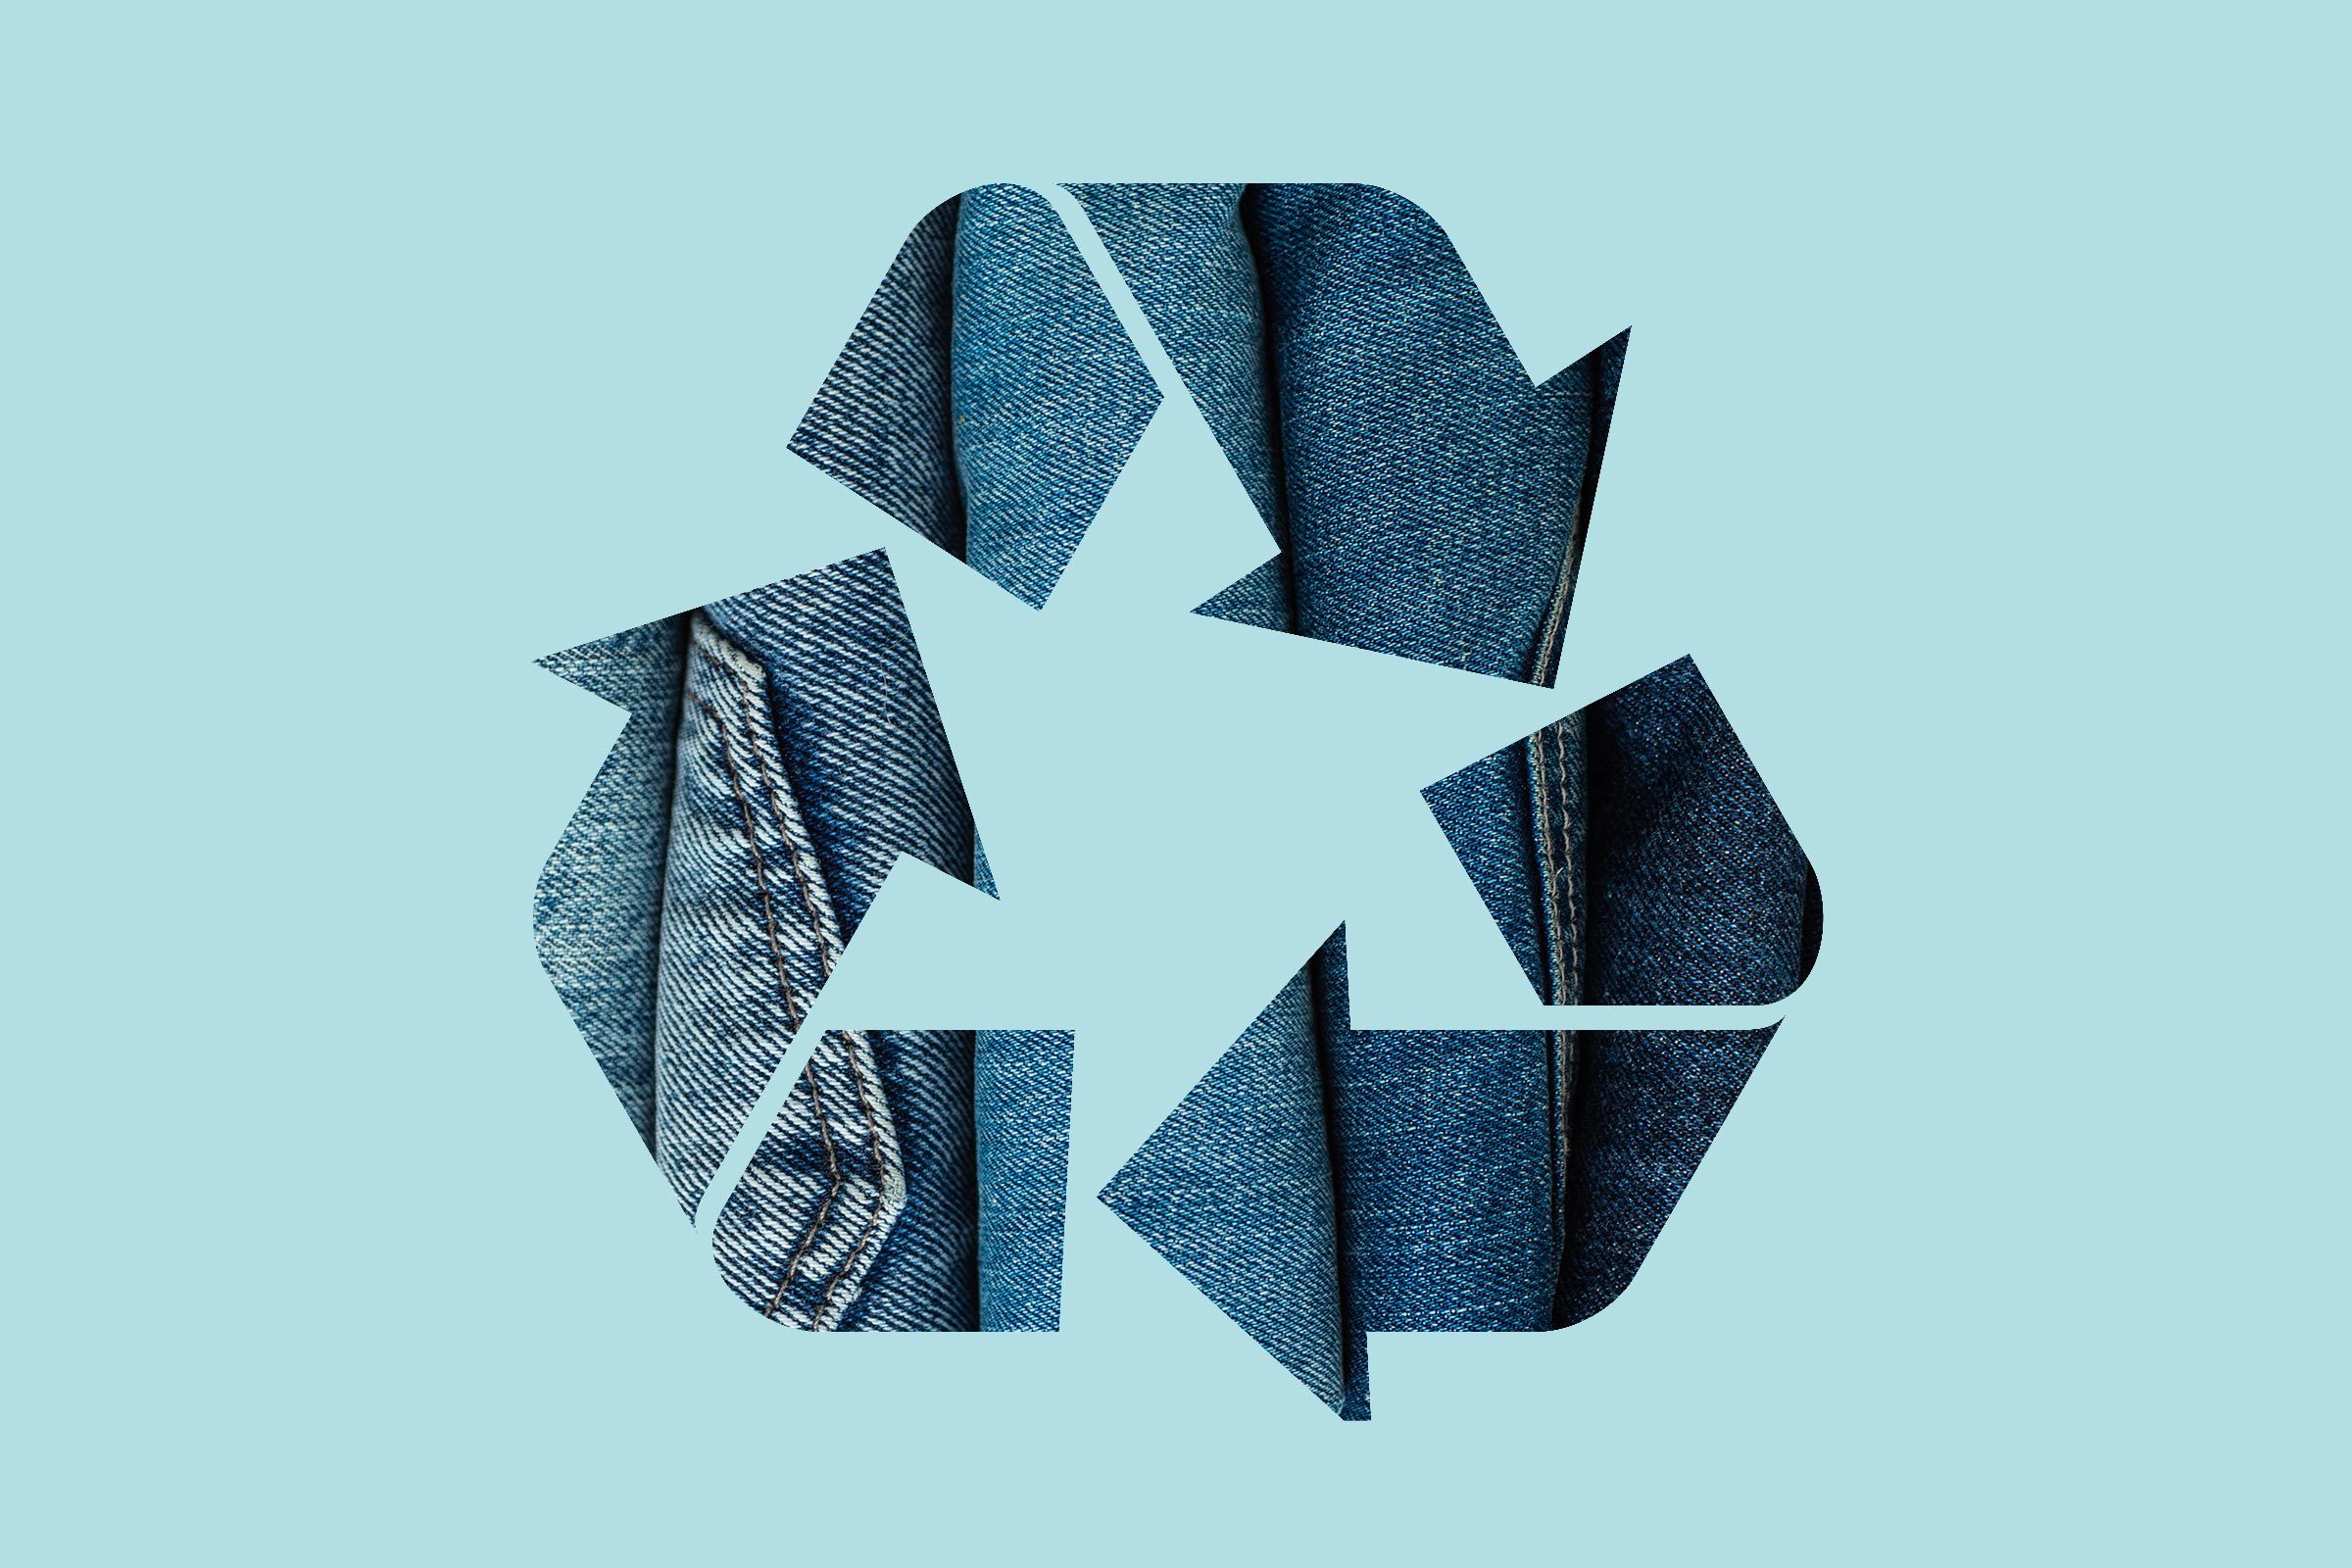 https://www.rd.com/wp-content/uploads/2019/07/RD-How-to-Recycle-denim-getty-183628575-1097583664.jpg?fit=700%2C467